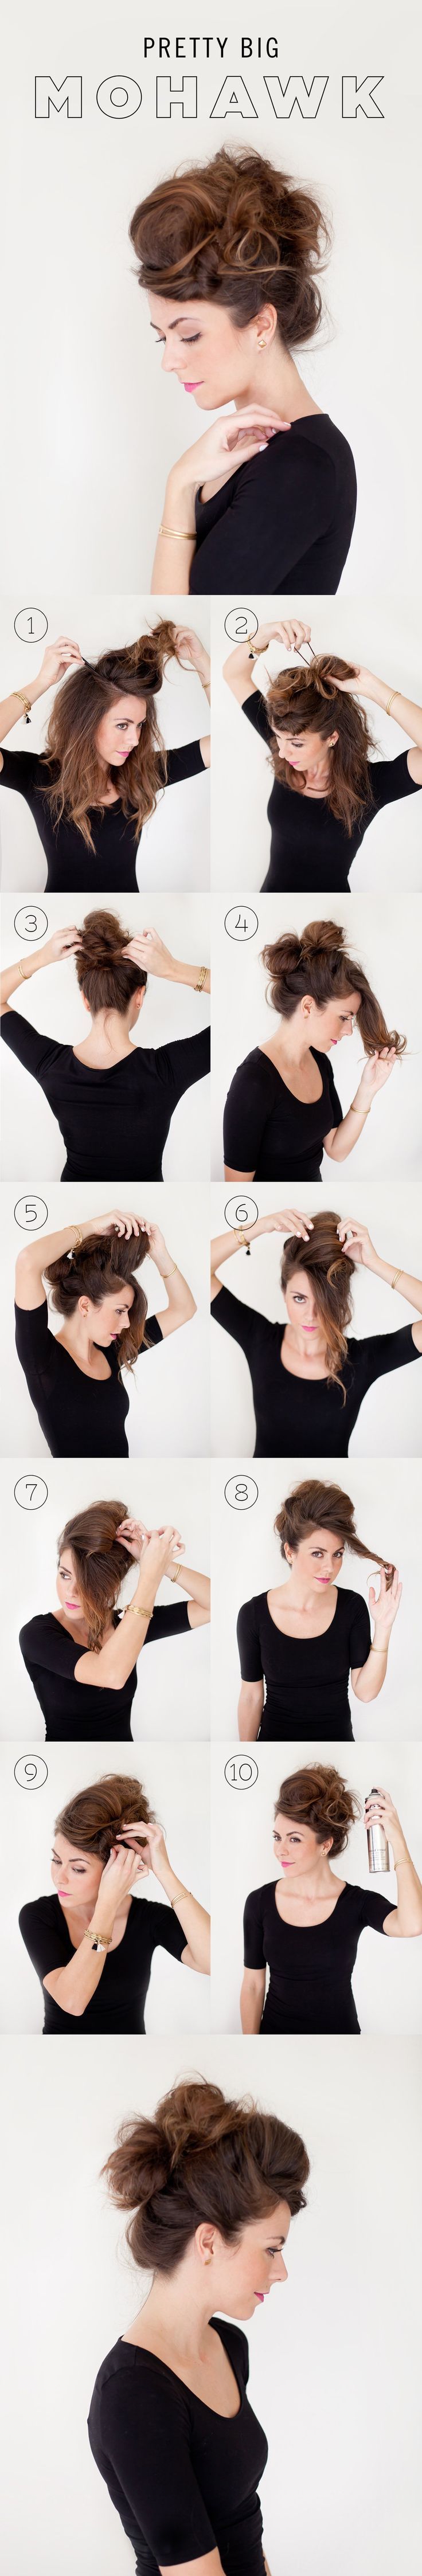 Pretty Big Mohawk Tutorial | 5 Messy Updos for Long Hair, check it out at makeup...